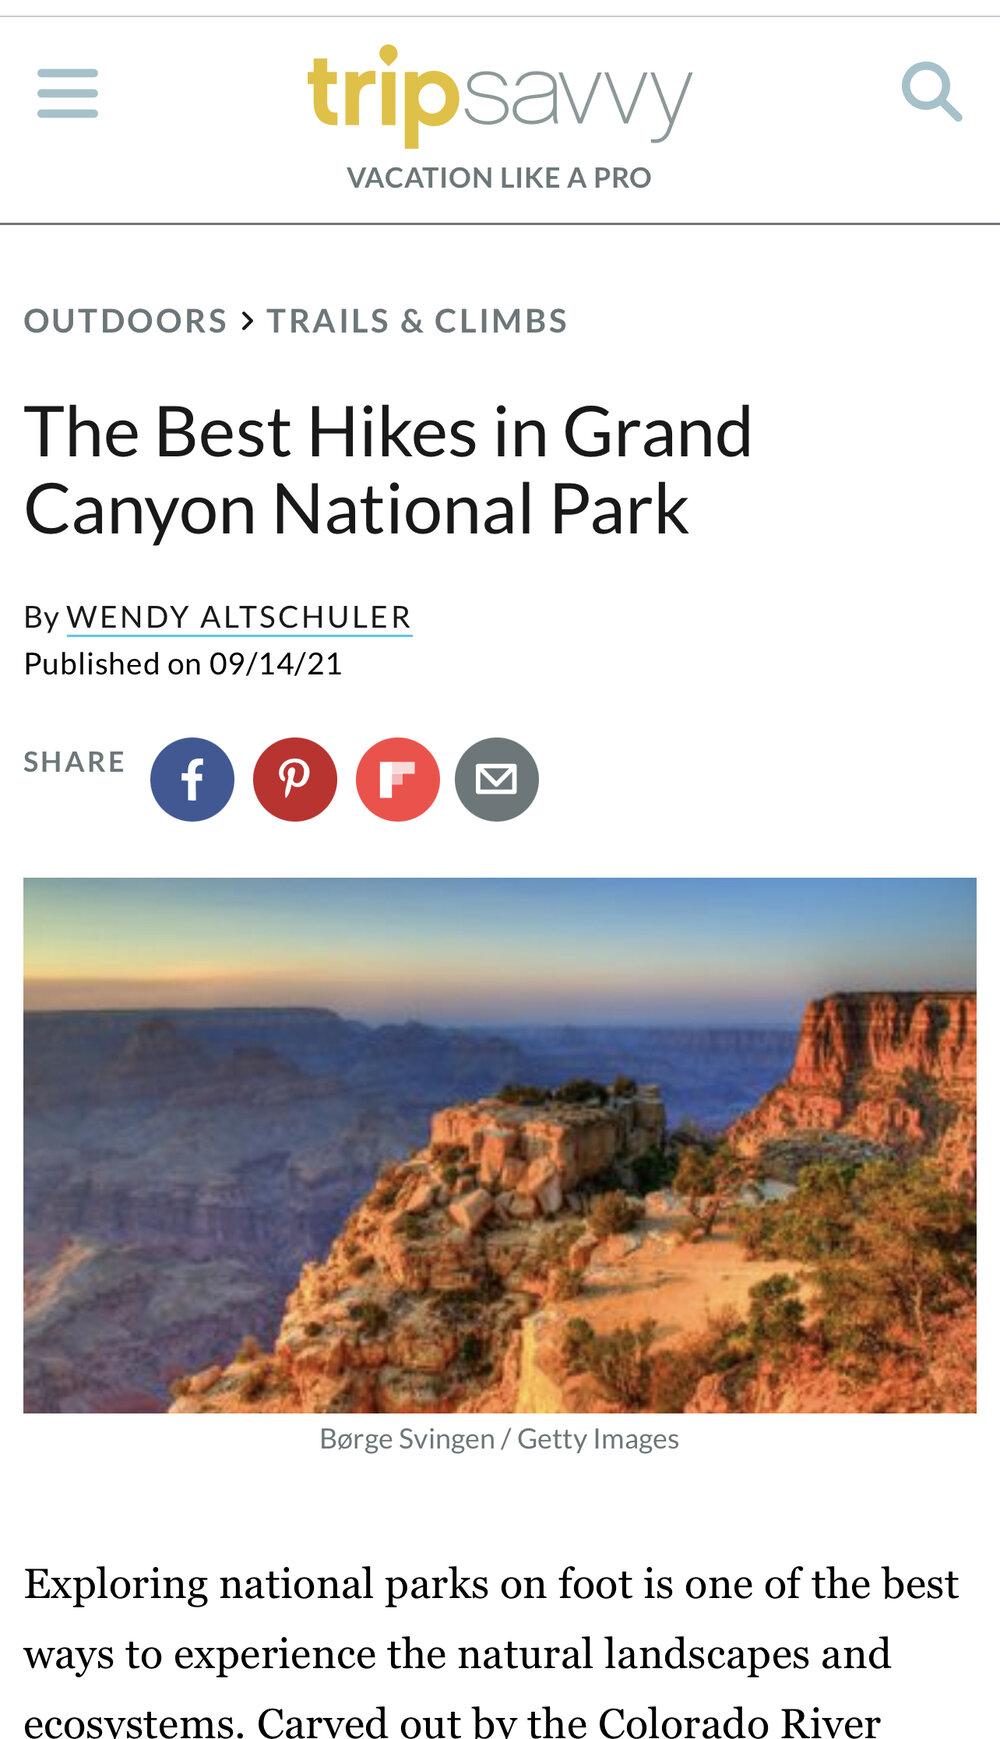 The Best Hikes in Grand Canyon National Park